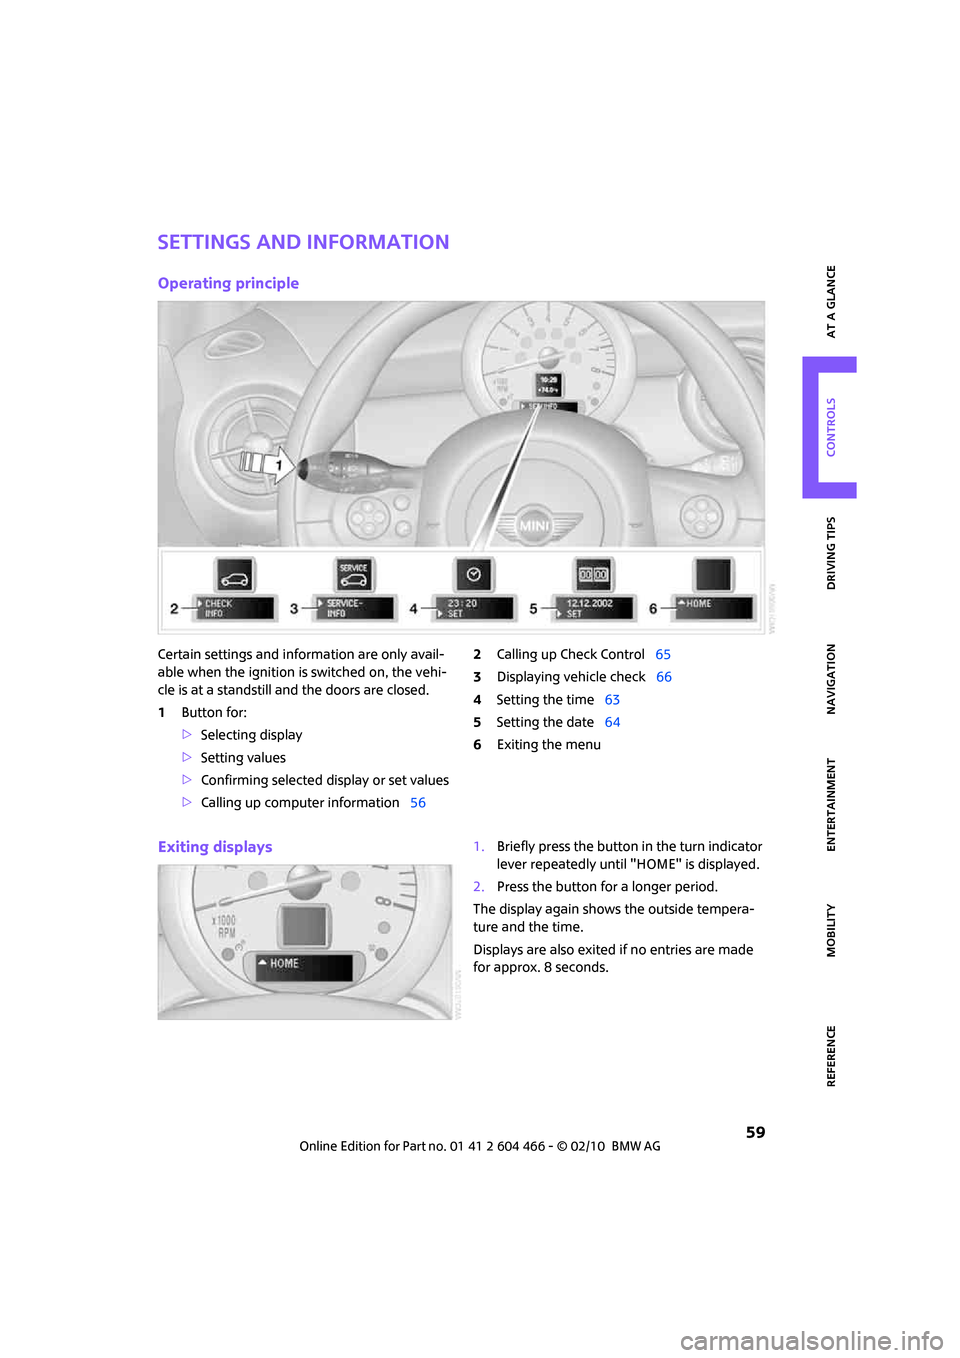 MINI Clubman 2010   (Mini Connected) Repair Manual MOBILITYAT A GLANCE CONTROLS DRIVING TIPS ENTERTAINMENT
 59
NAVIGATION REFERENCE
Settings and information
Operating principle
Certain settings and information are only avail-
able when the ignition is